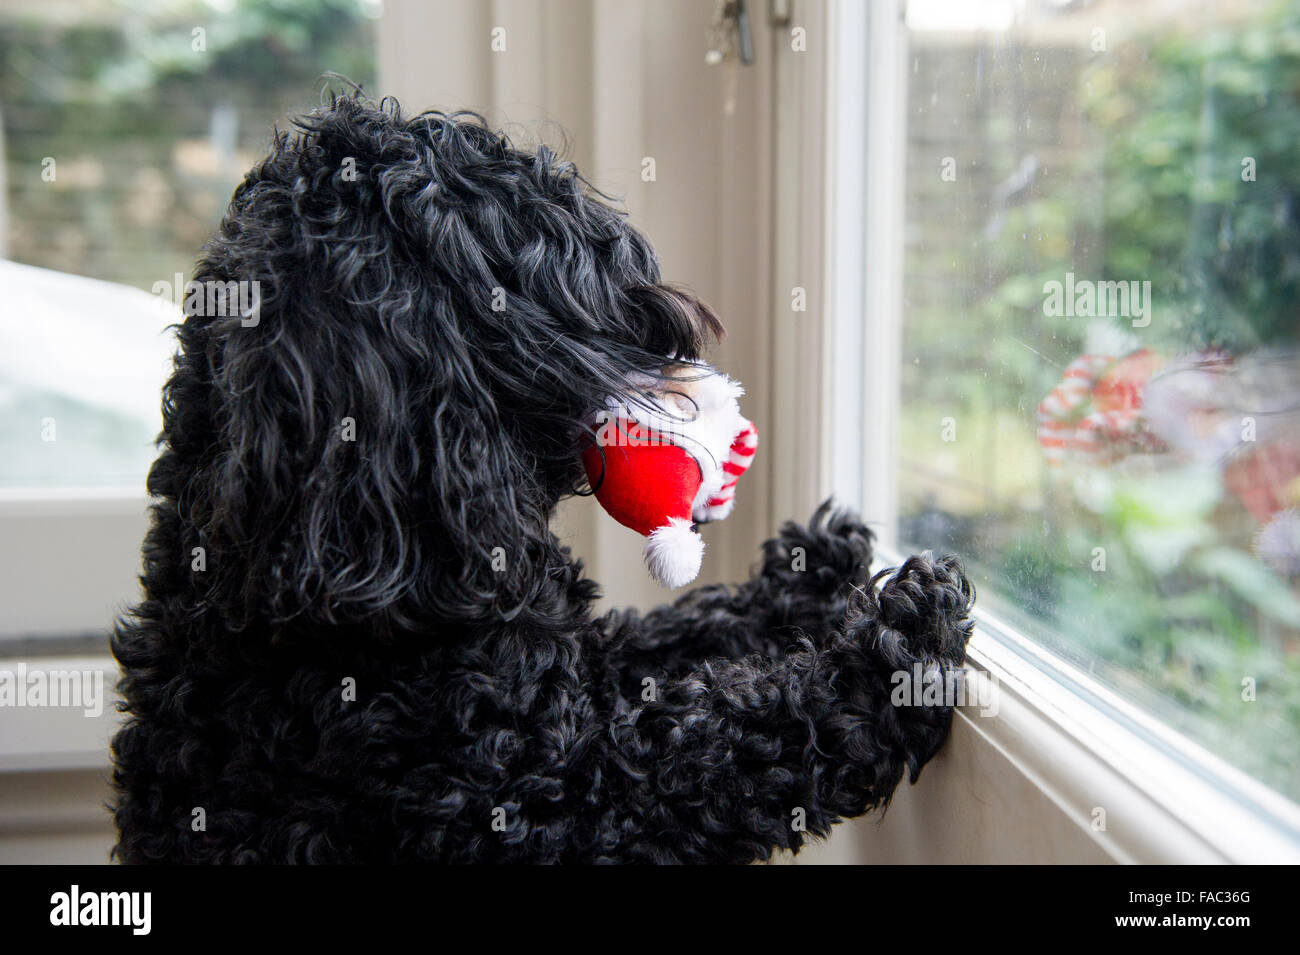 A dog looks outside into the garden with a Father Christmas toy in its mouth Stock Photo